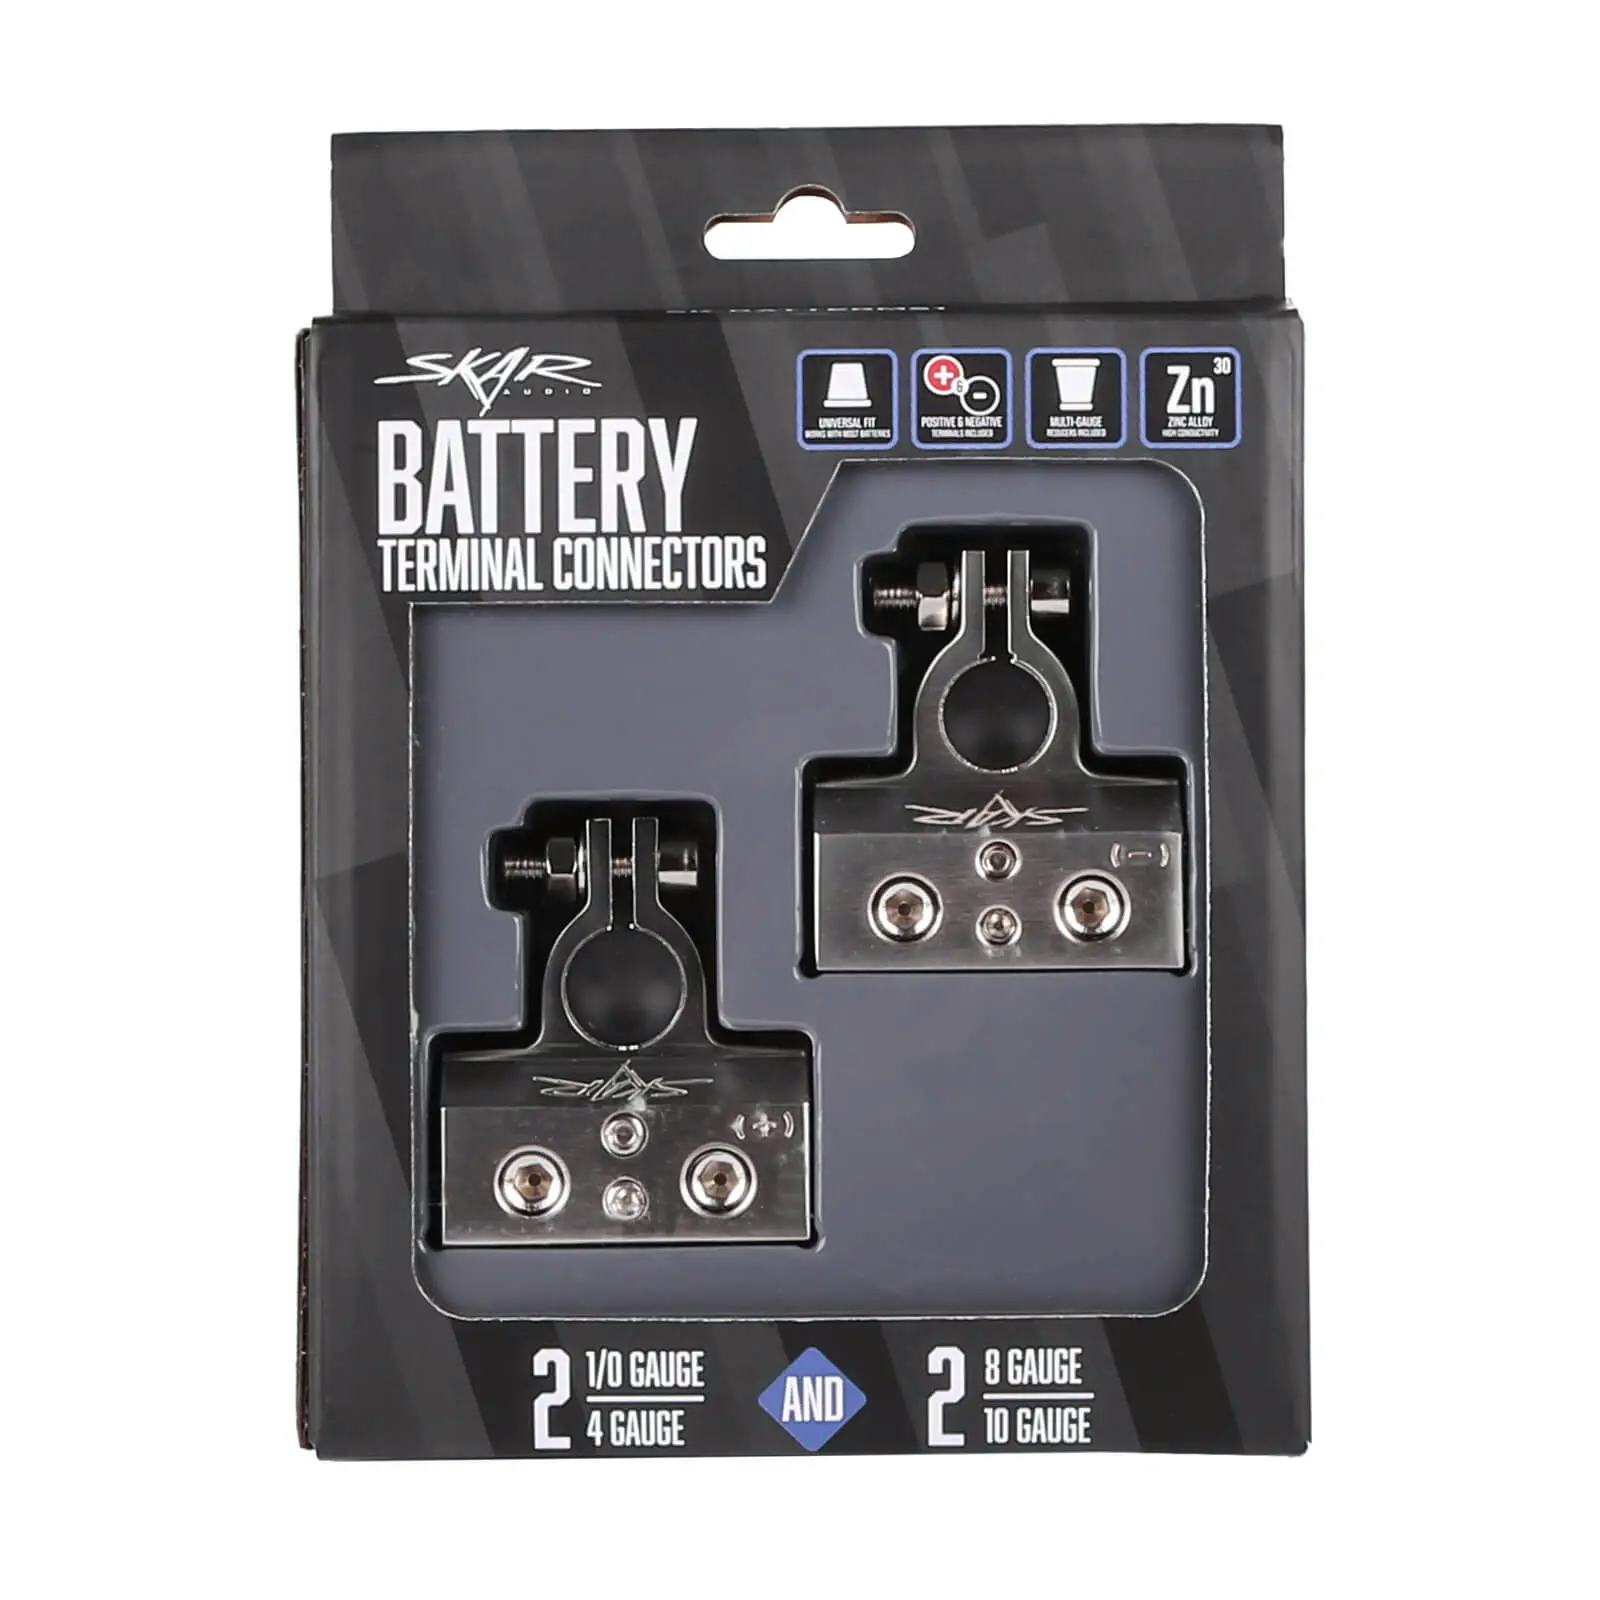 SK-BATTERMS1 | x2 0/4 Gauge and x2 8/10 Gauge (+/-) Top Post Heavy Duty Positive and Negative Battery Terminals #7